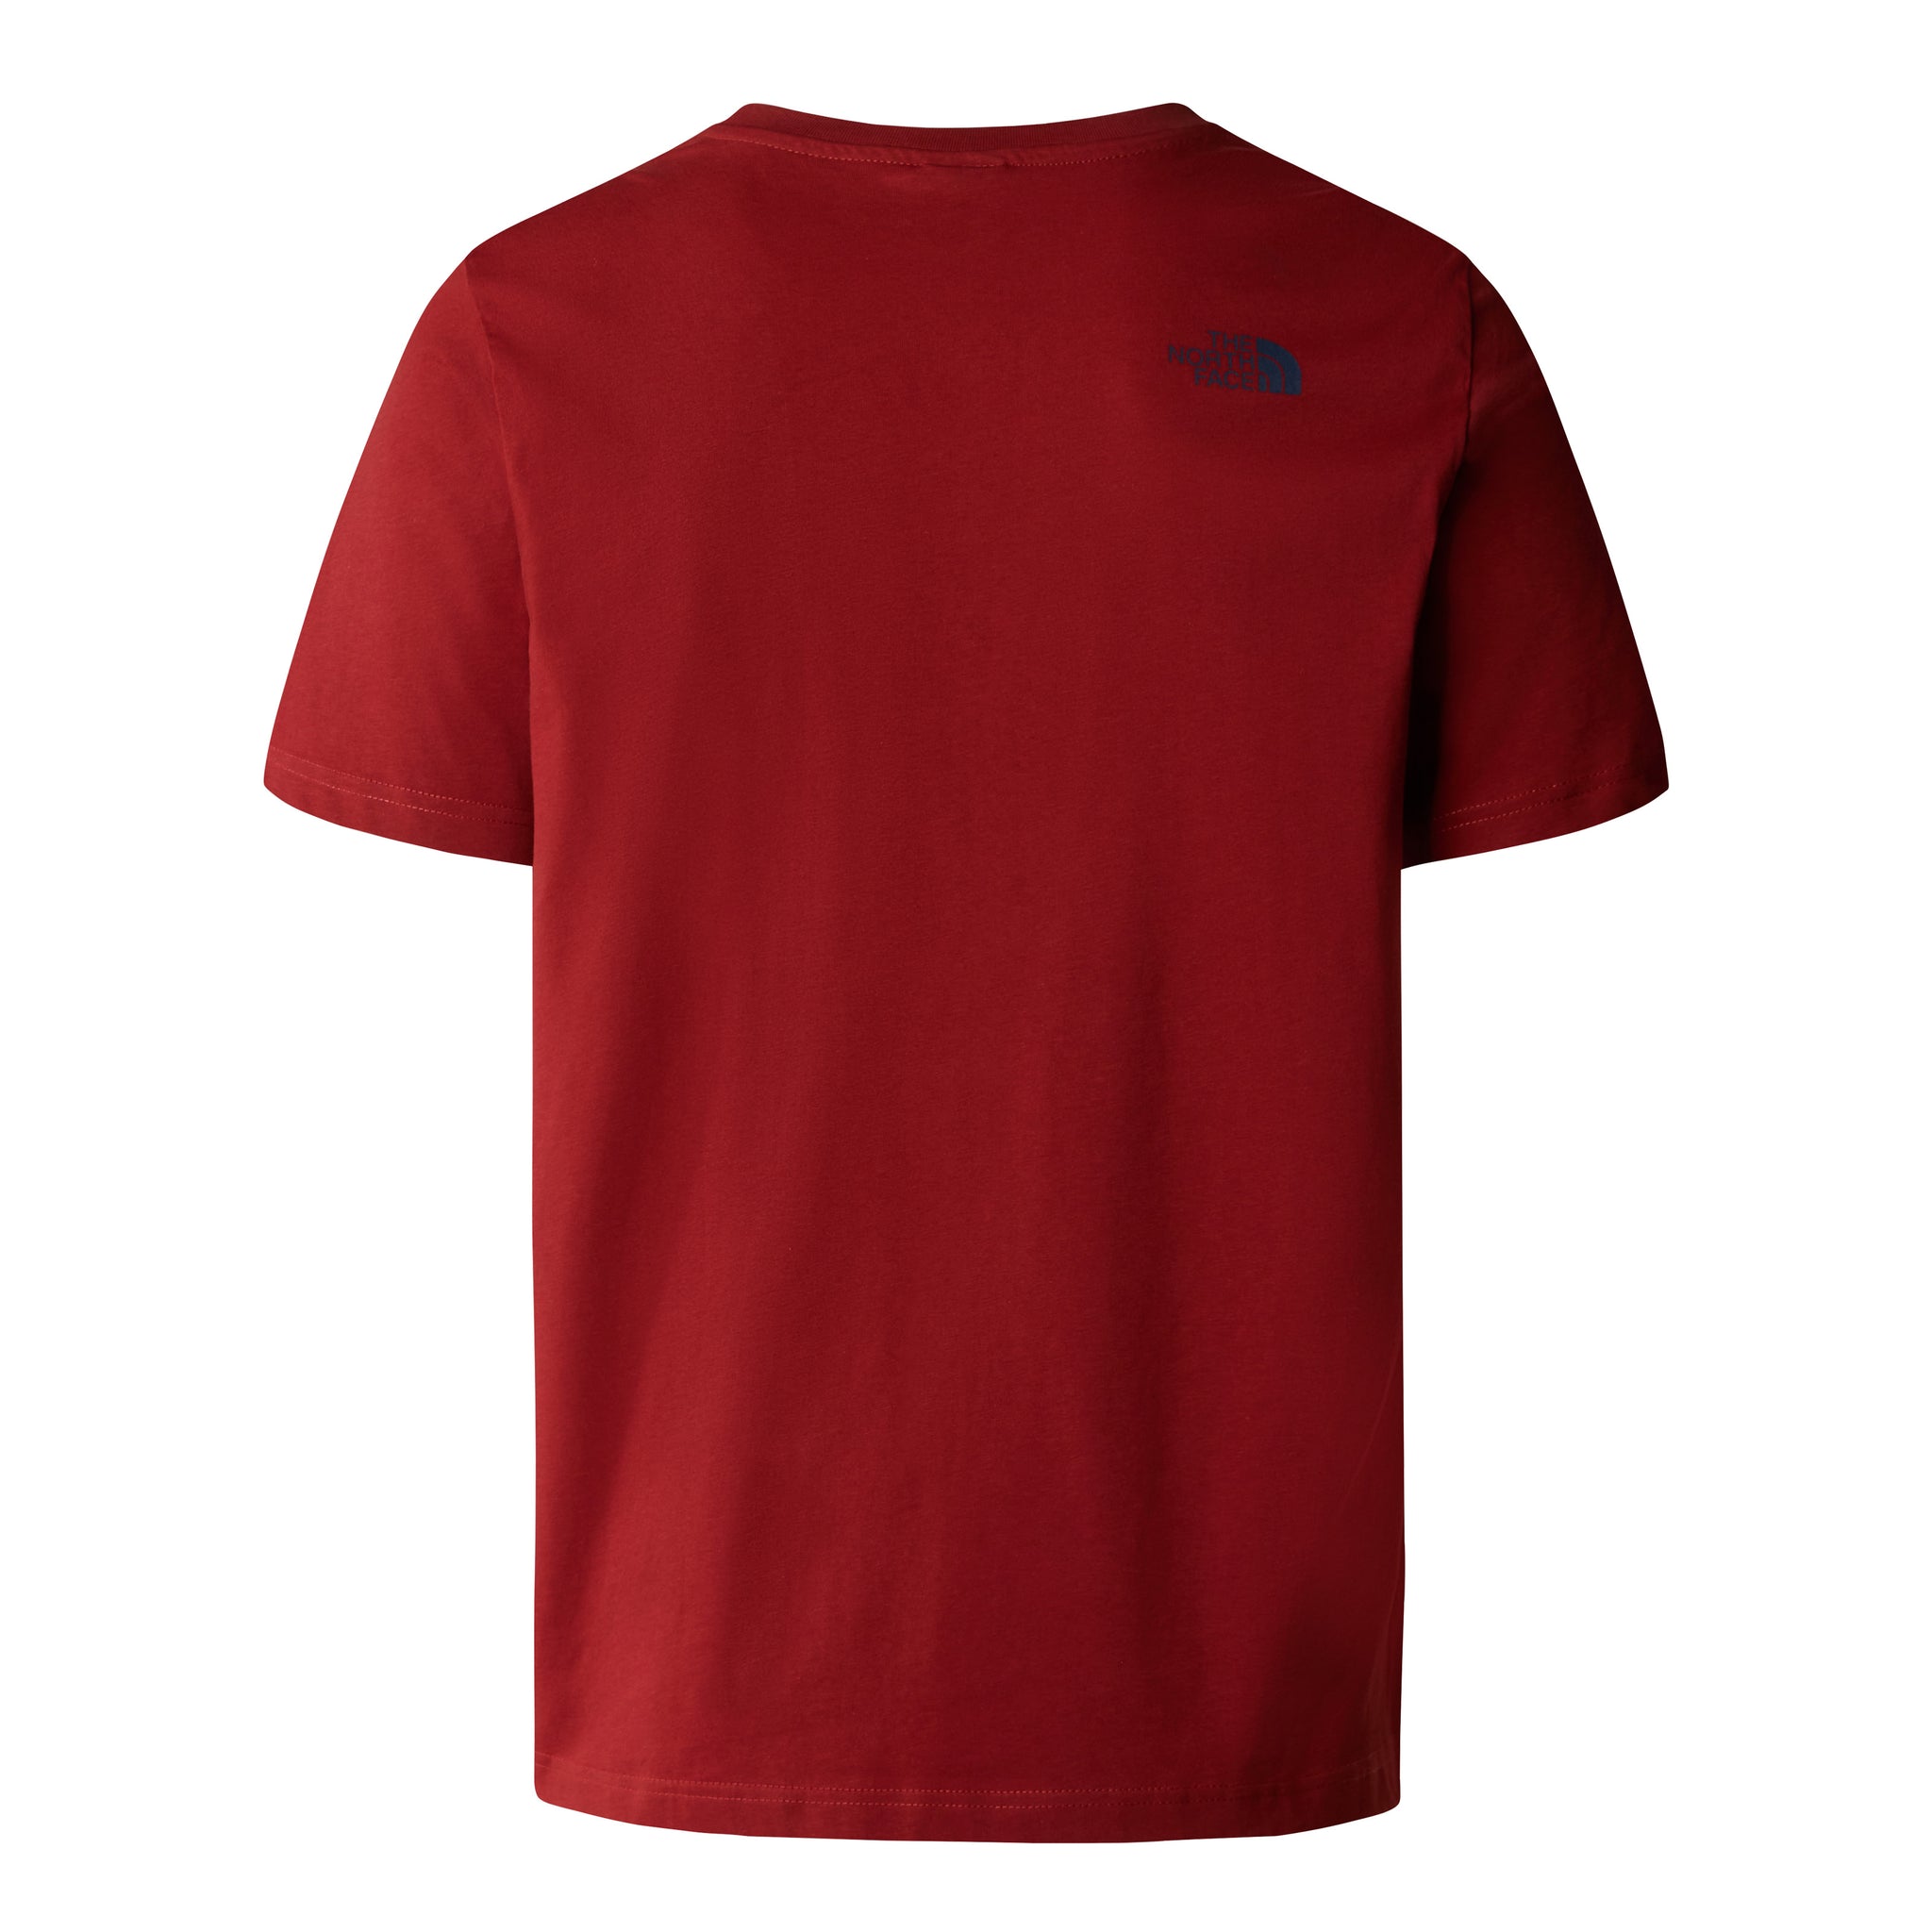 T-Shirt Rust 2 con Stampa / Rosso - Ideal Moda